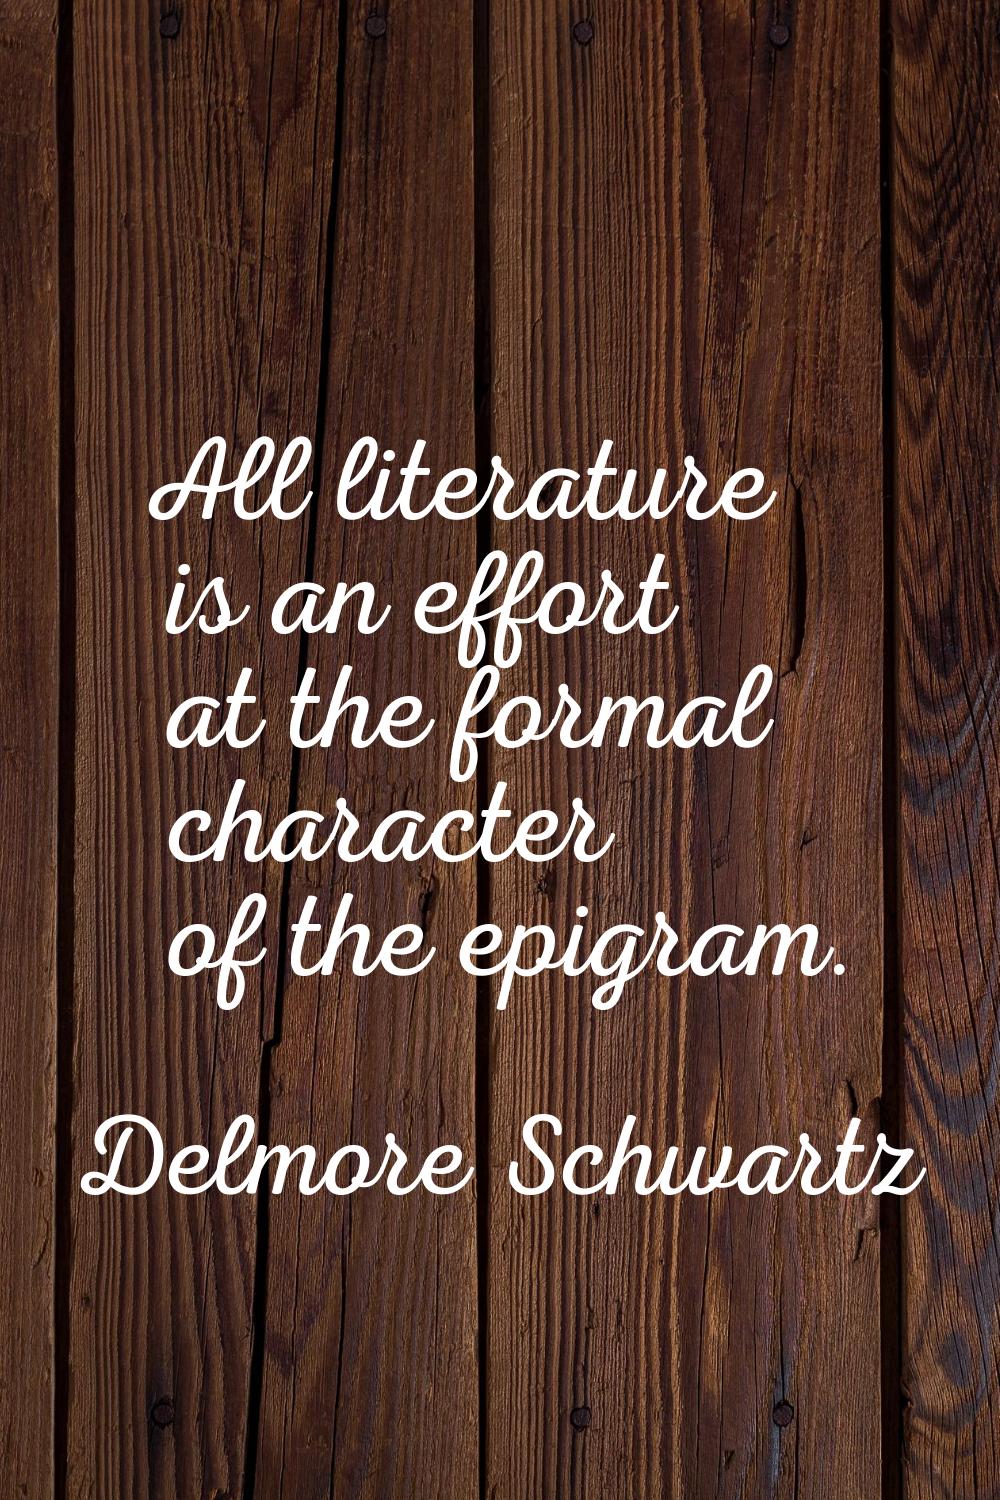 All literature is an effort at the formal character of the epigram.